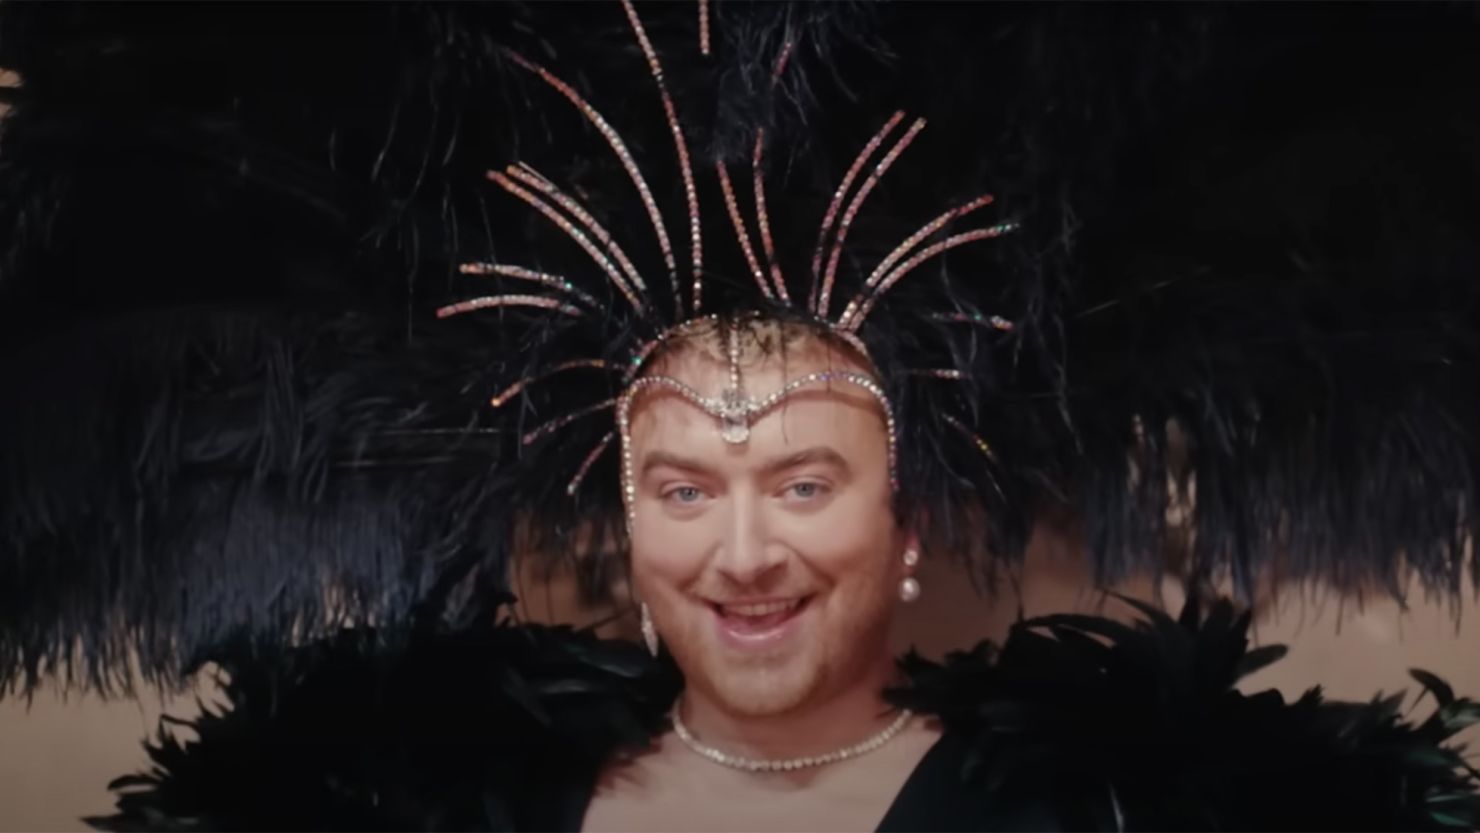 English singer Sam Smith dons elaborate outfits in their music video "I'm Not Here To Make Friends."